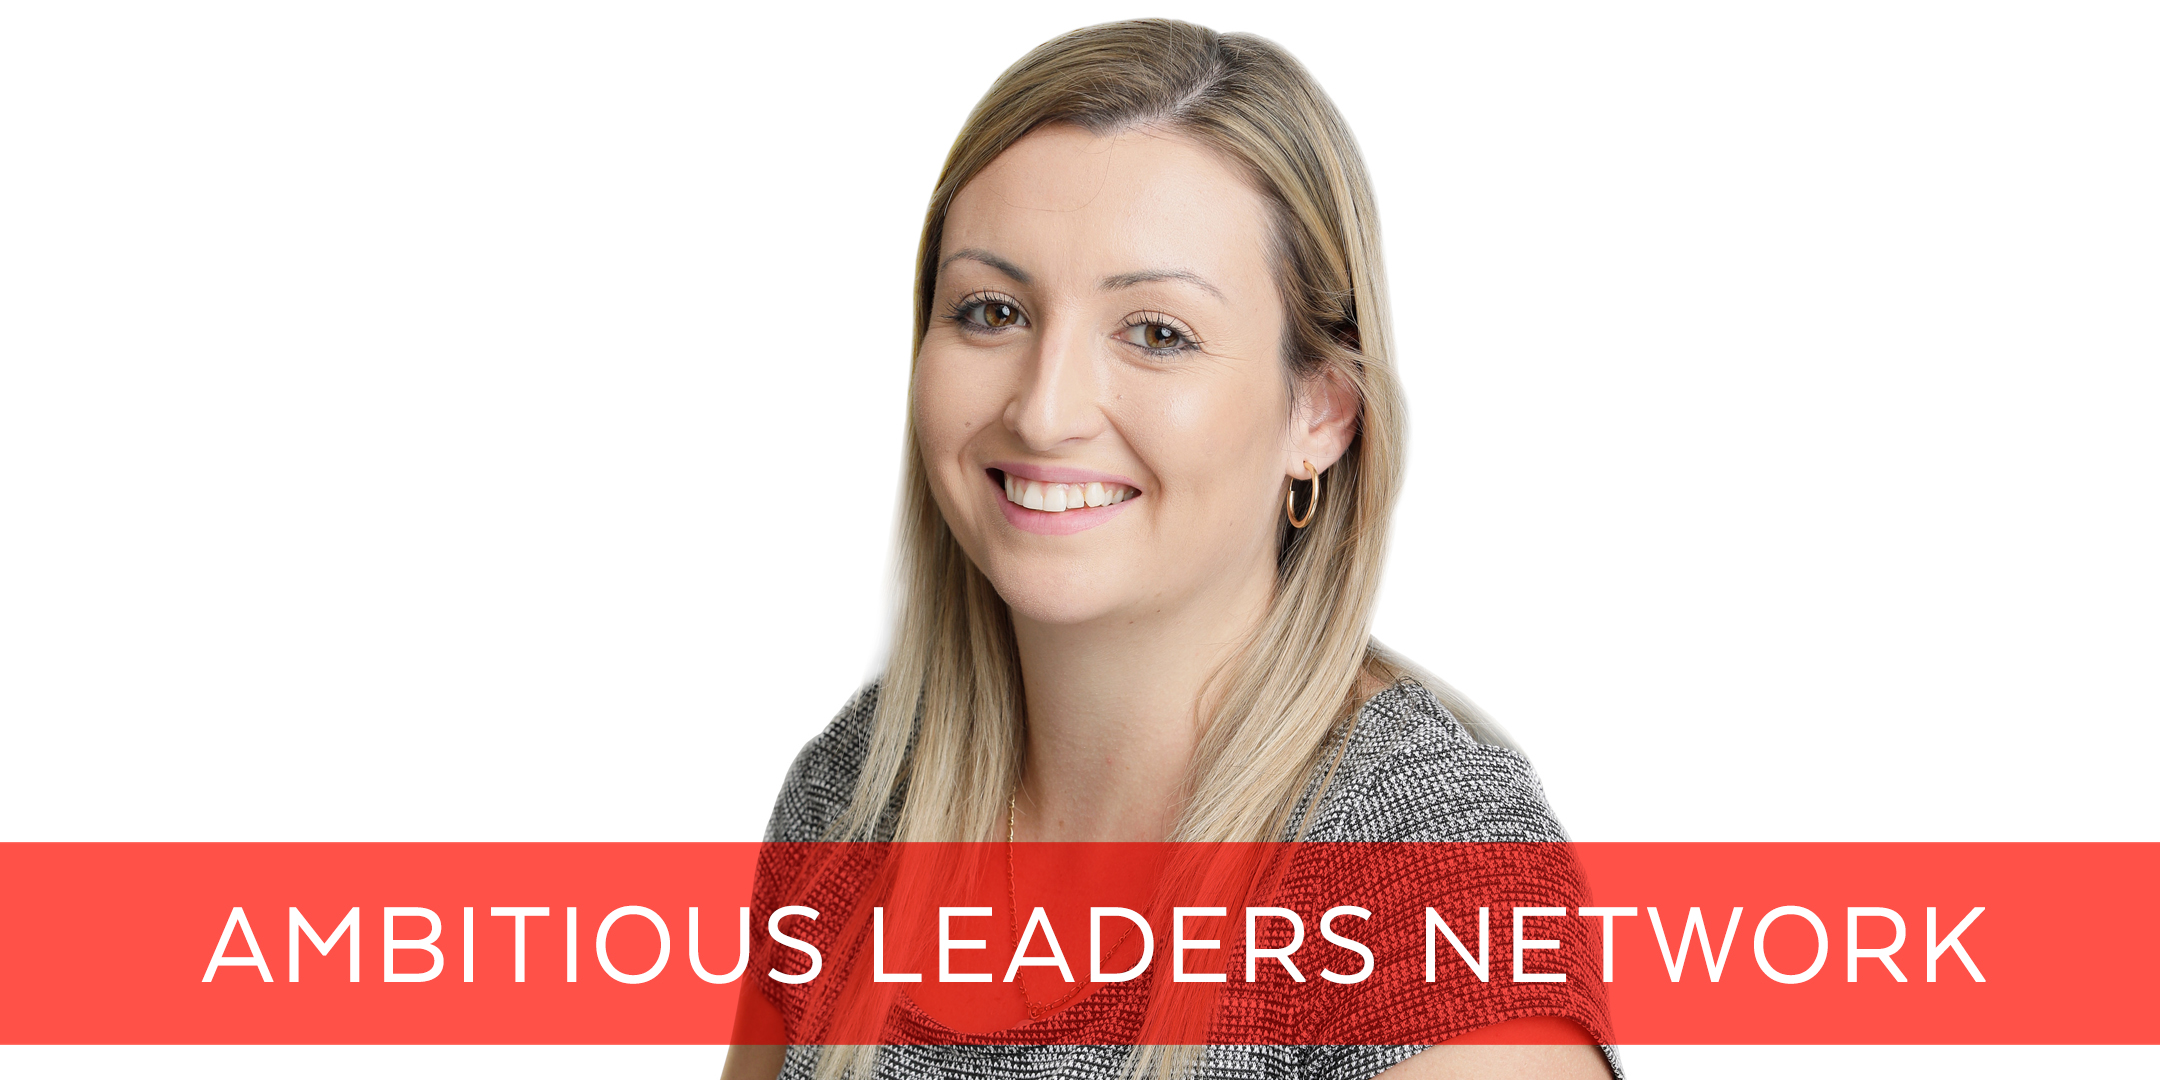 Ambitious Leaders Network - Alanna Forrest